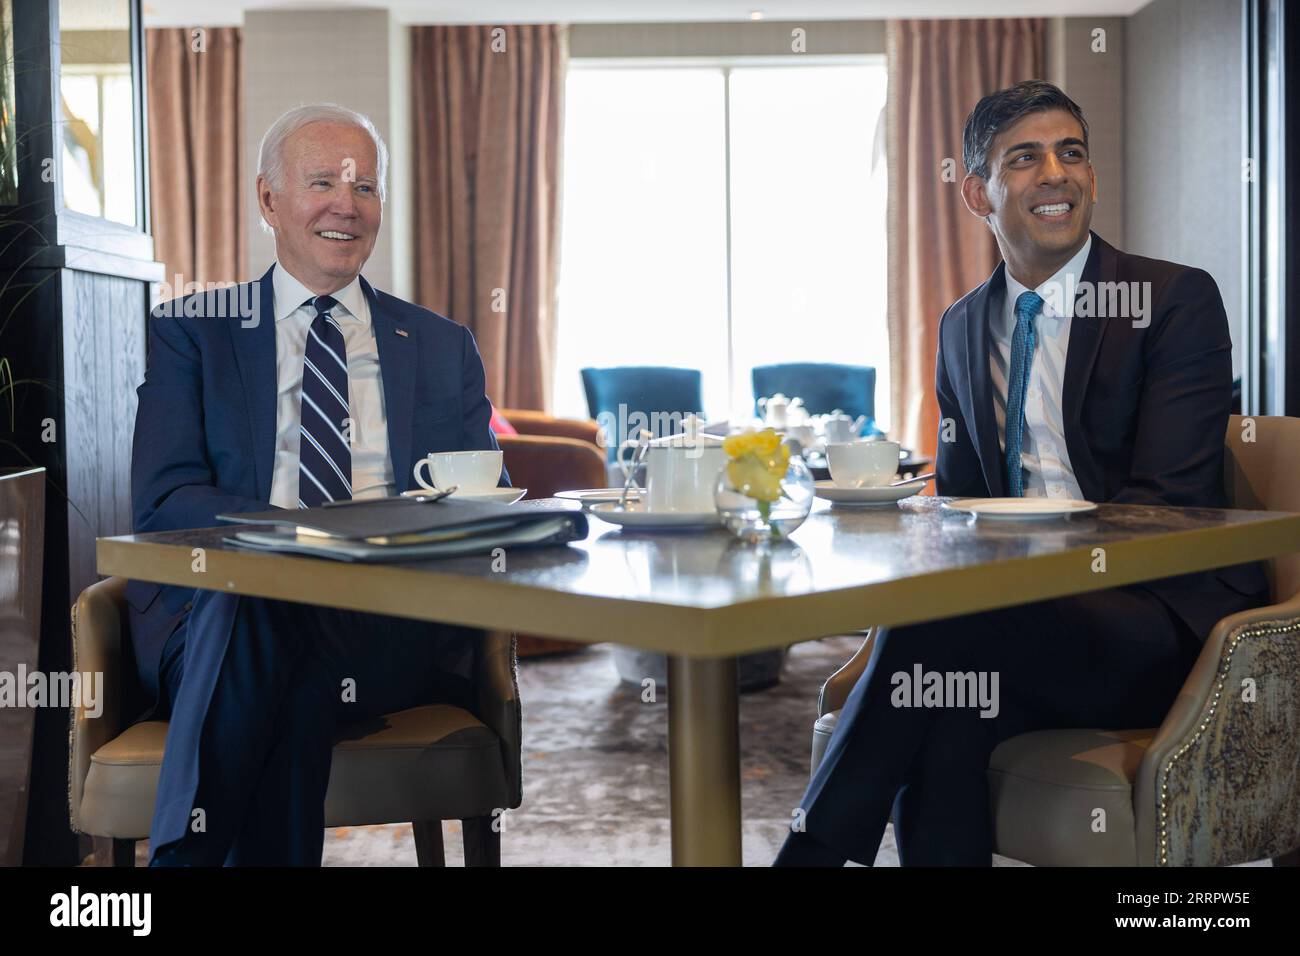 230412 -- BELFAST, April 12, 2023 -- British Prime Minister Rishi Sunak R meets with U.S. President Joe Biden in Belfast, Northern Ireland, the United Kingdom, on April 12, 2023. During his visit to Belfast on Wednesday, U.S. President Joe Biden called for the restoration of the power-sharing government in Northern Ireland. However, analysts do not expect his plea to lead to significant change. /Handout via Xinhua UK-NORTHERN IRELAND-BELFAST-U.S.-PRESIDENT-VISIT SimonxWalker/Nox10xDowningxStreet PUBLICATIONxNOTxINxCHN Stock Photo